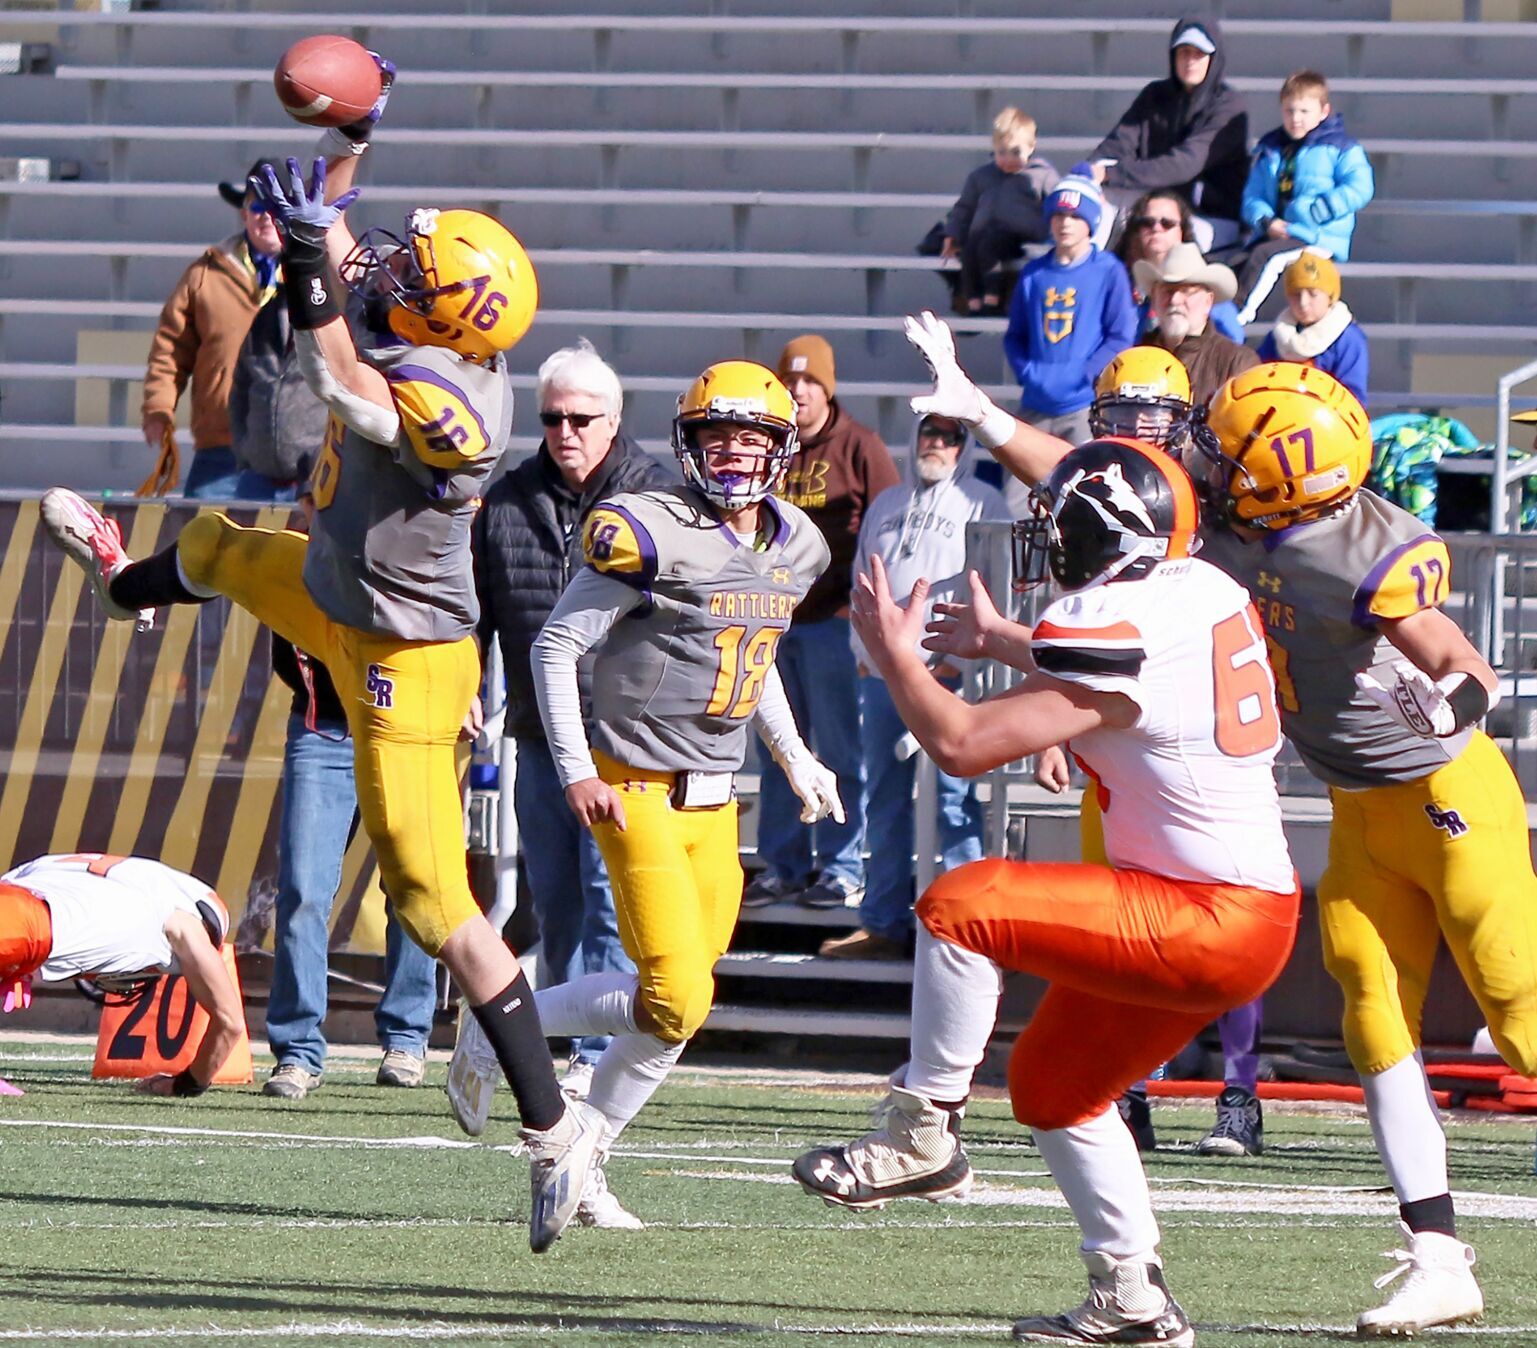 State Football Championships in Laramie, Wyoming: Rematches and Newcomers Compete for Titles